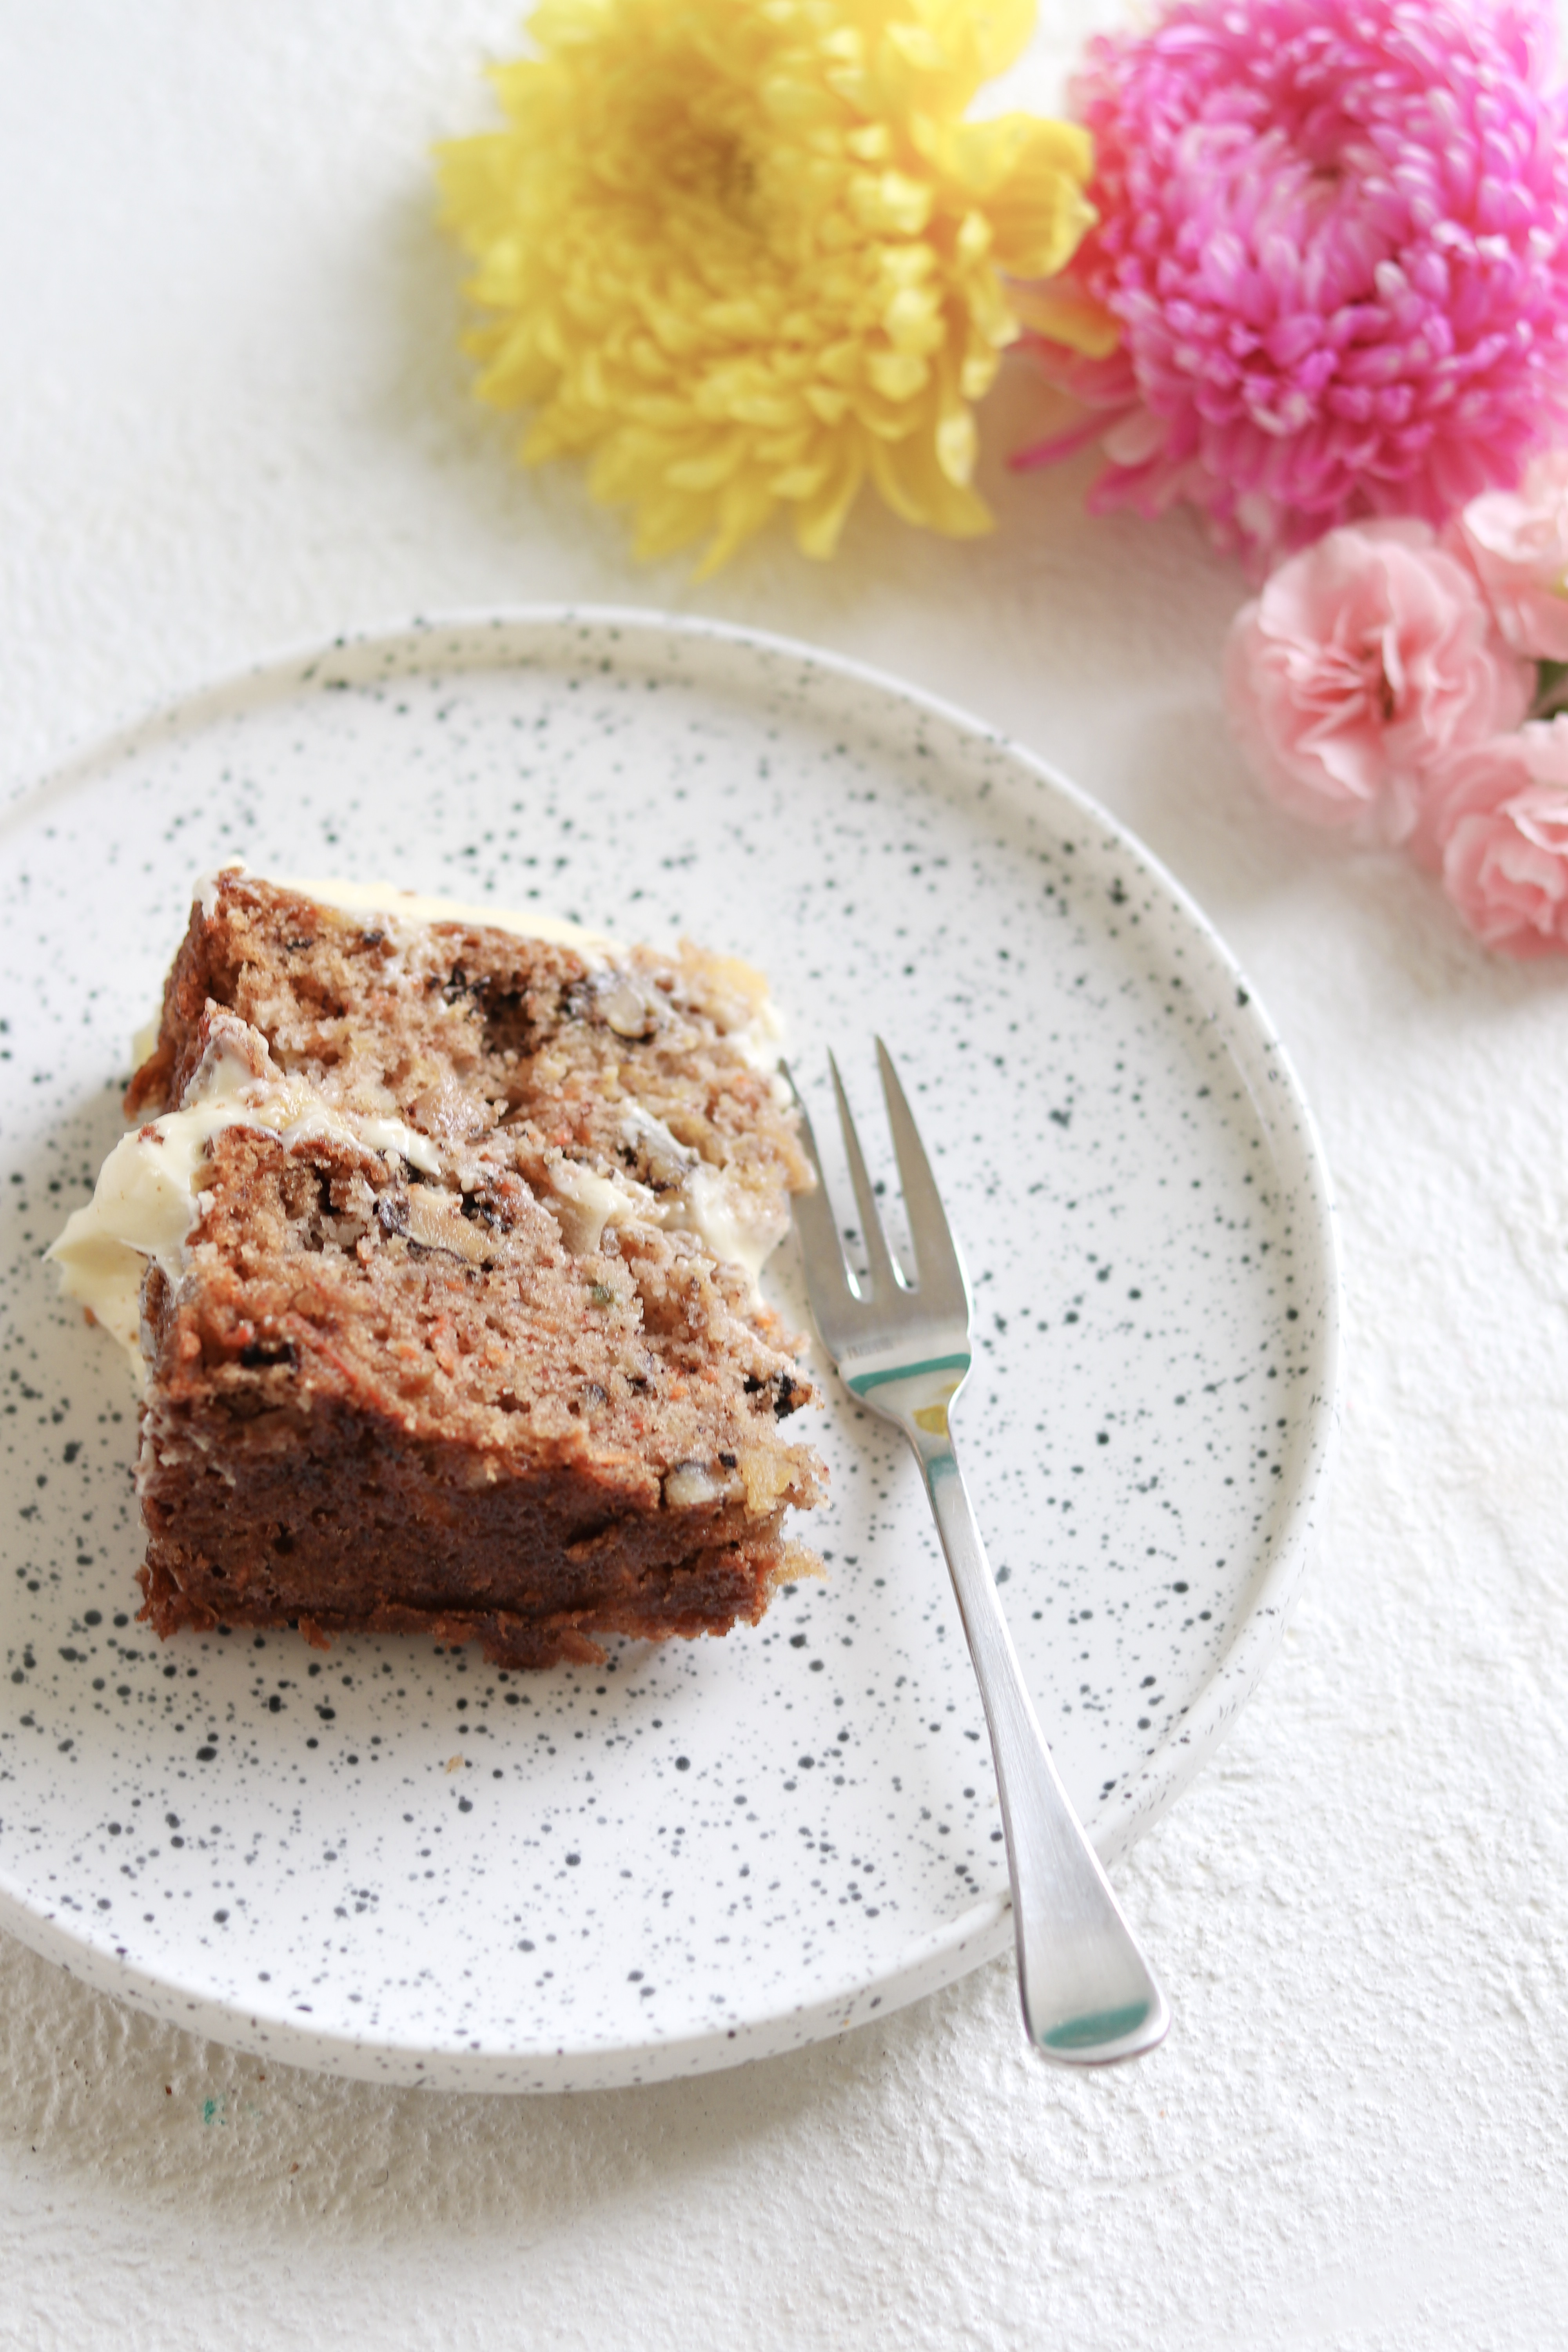 A delicious slice of carrot cake with lashings of cream cheese frosting, on a plate with a fork